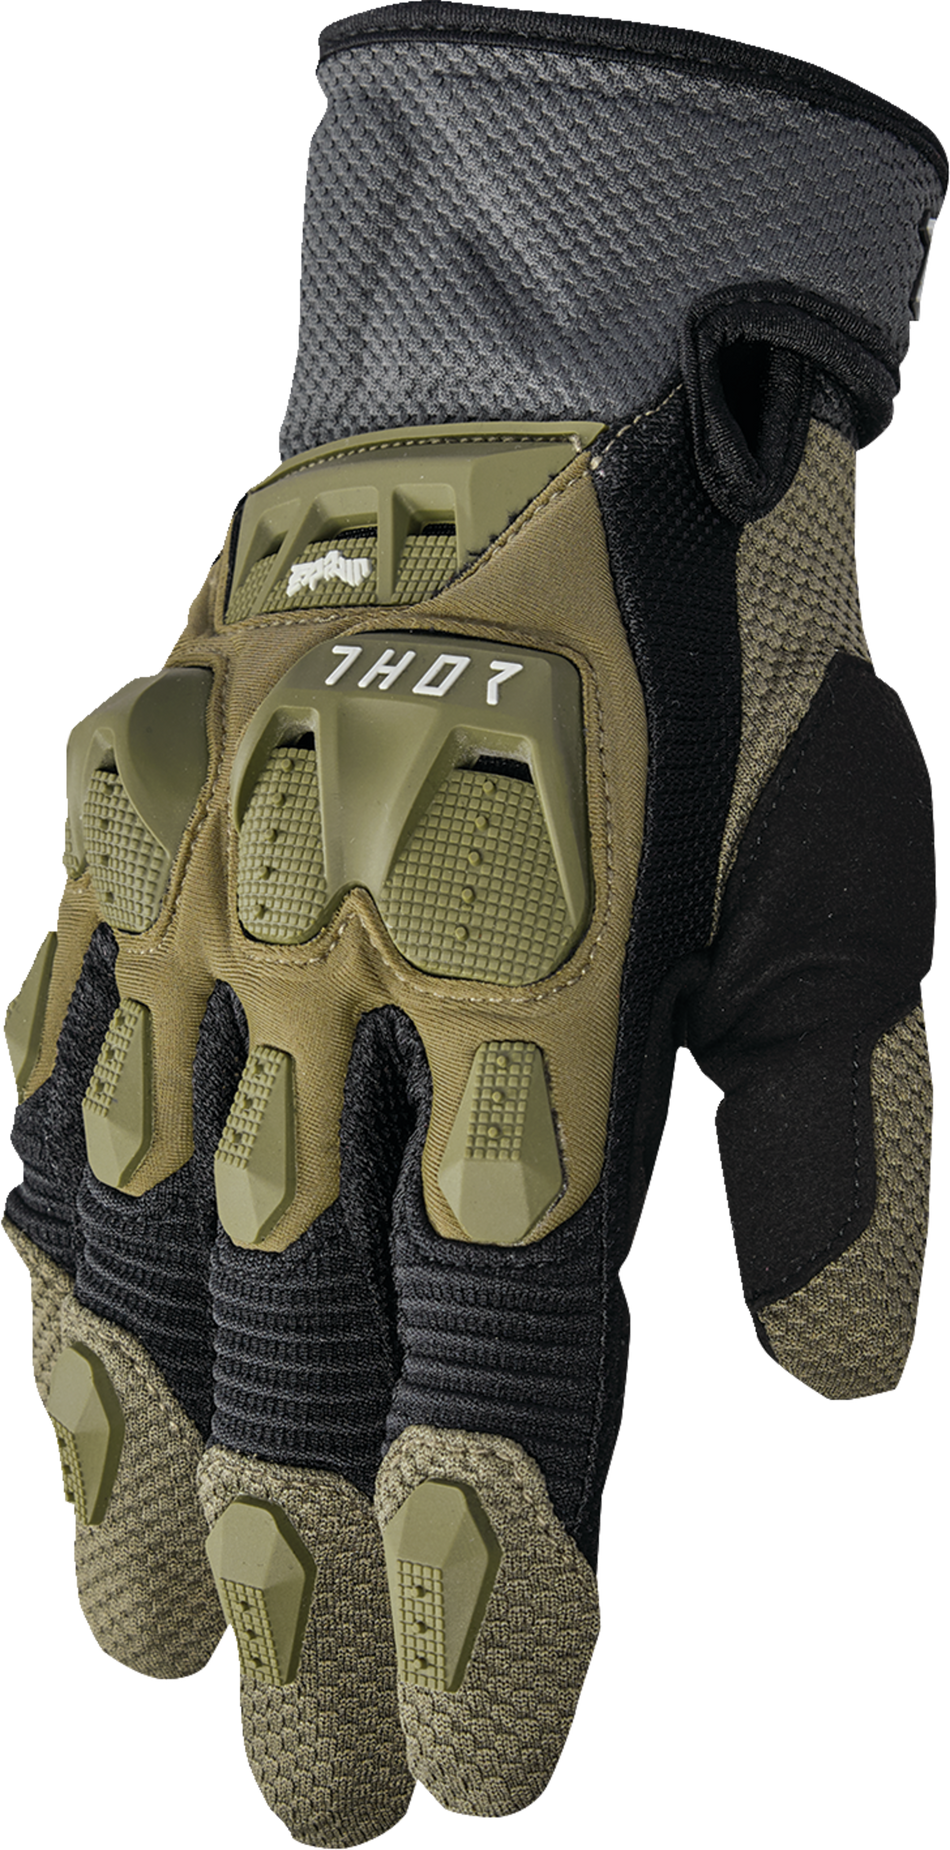 THOR Terrain Gloves - Army/Charcoal - Large 3330-7288